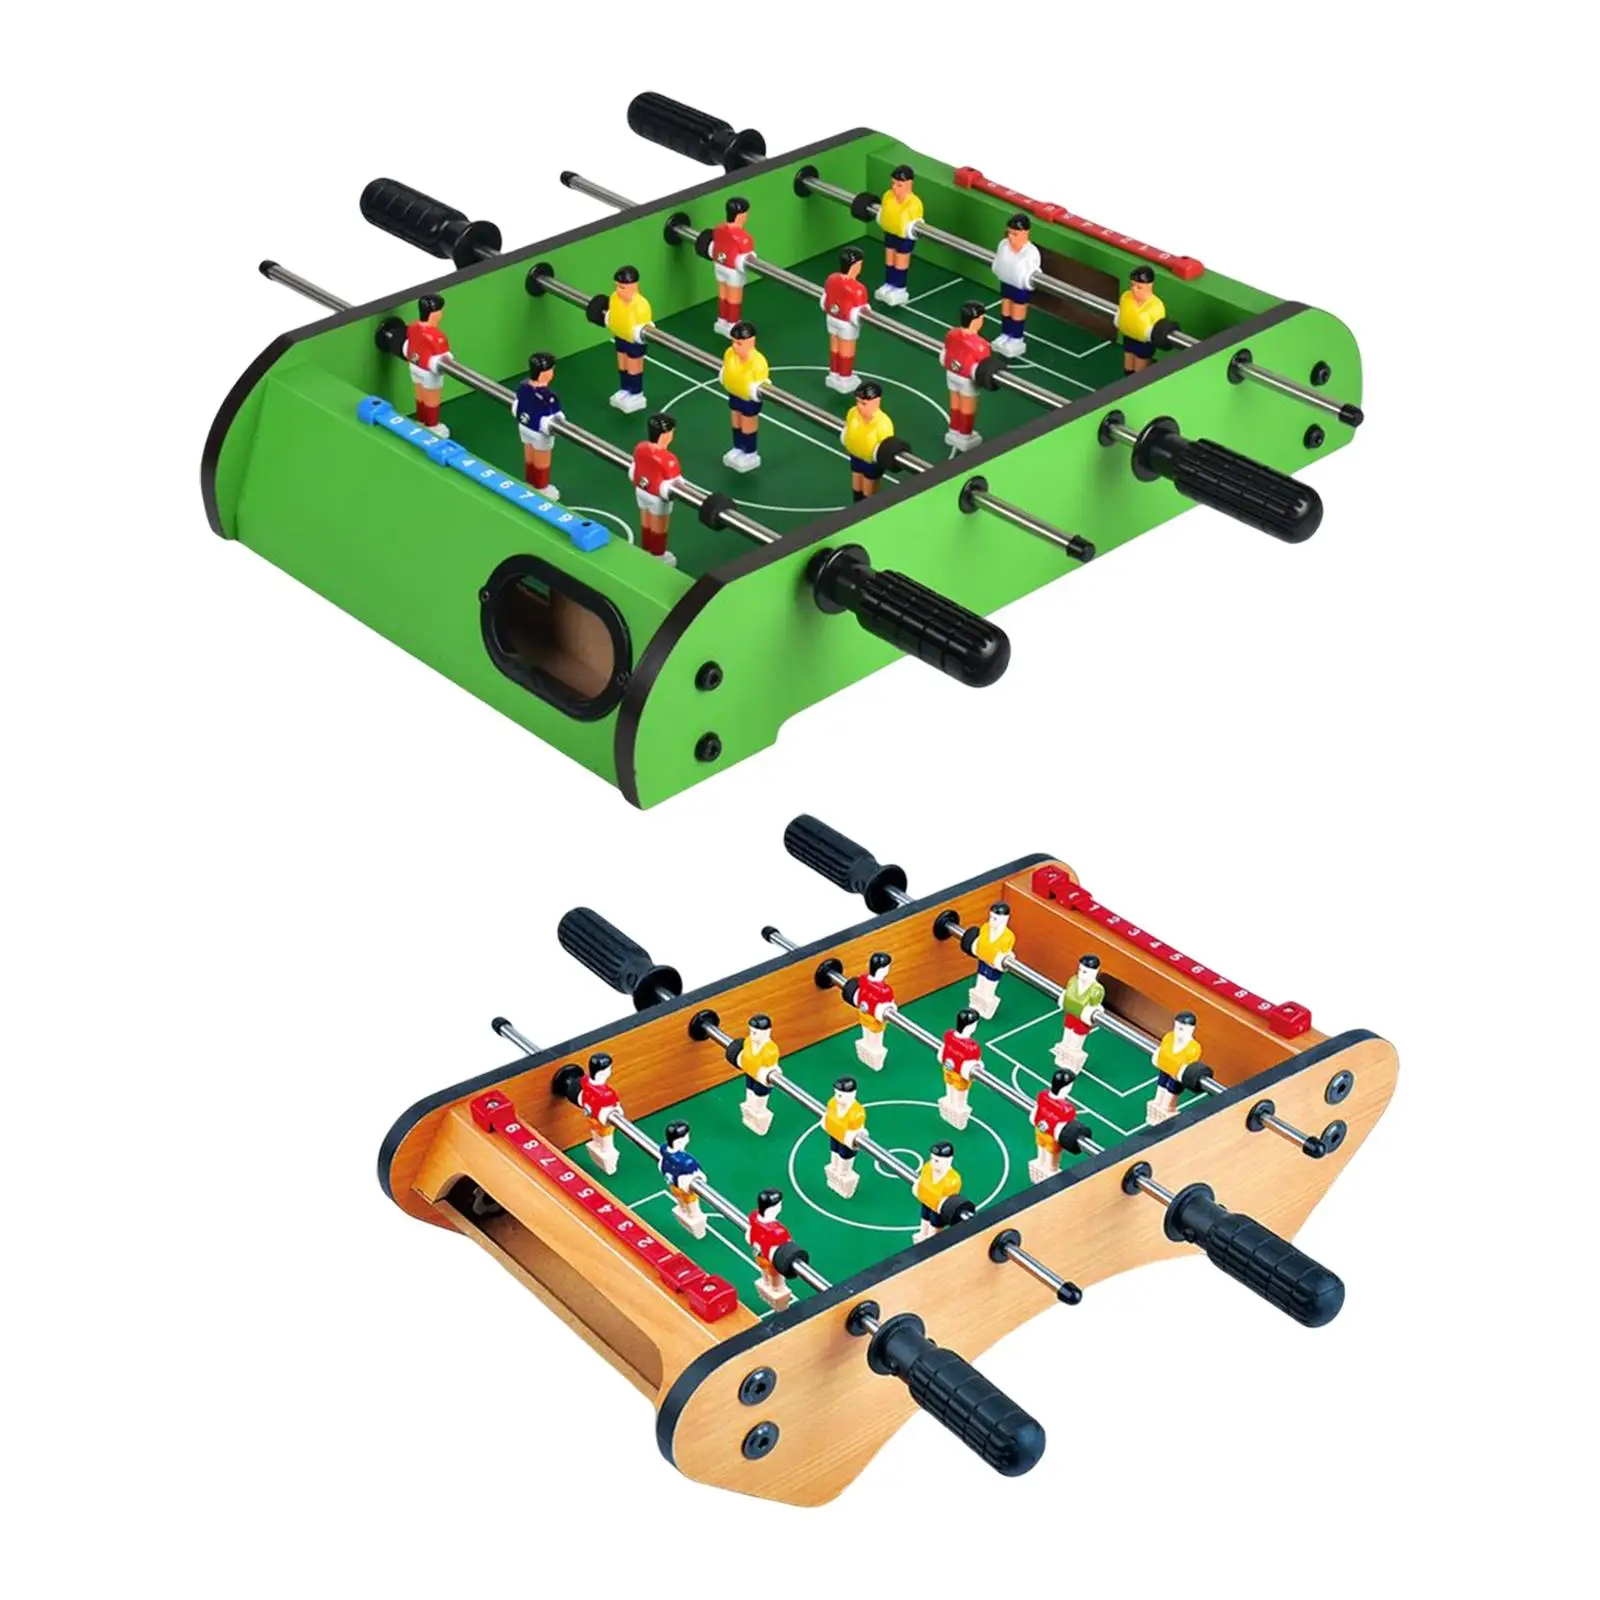 Wooden Soccer Table Football Board Game DIY Portable for Family Sports